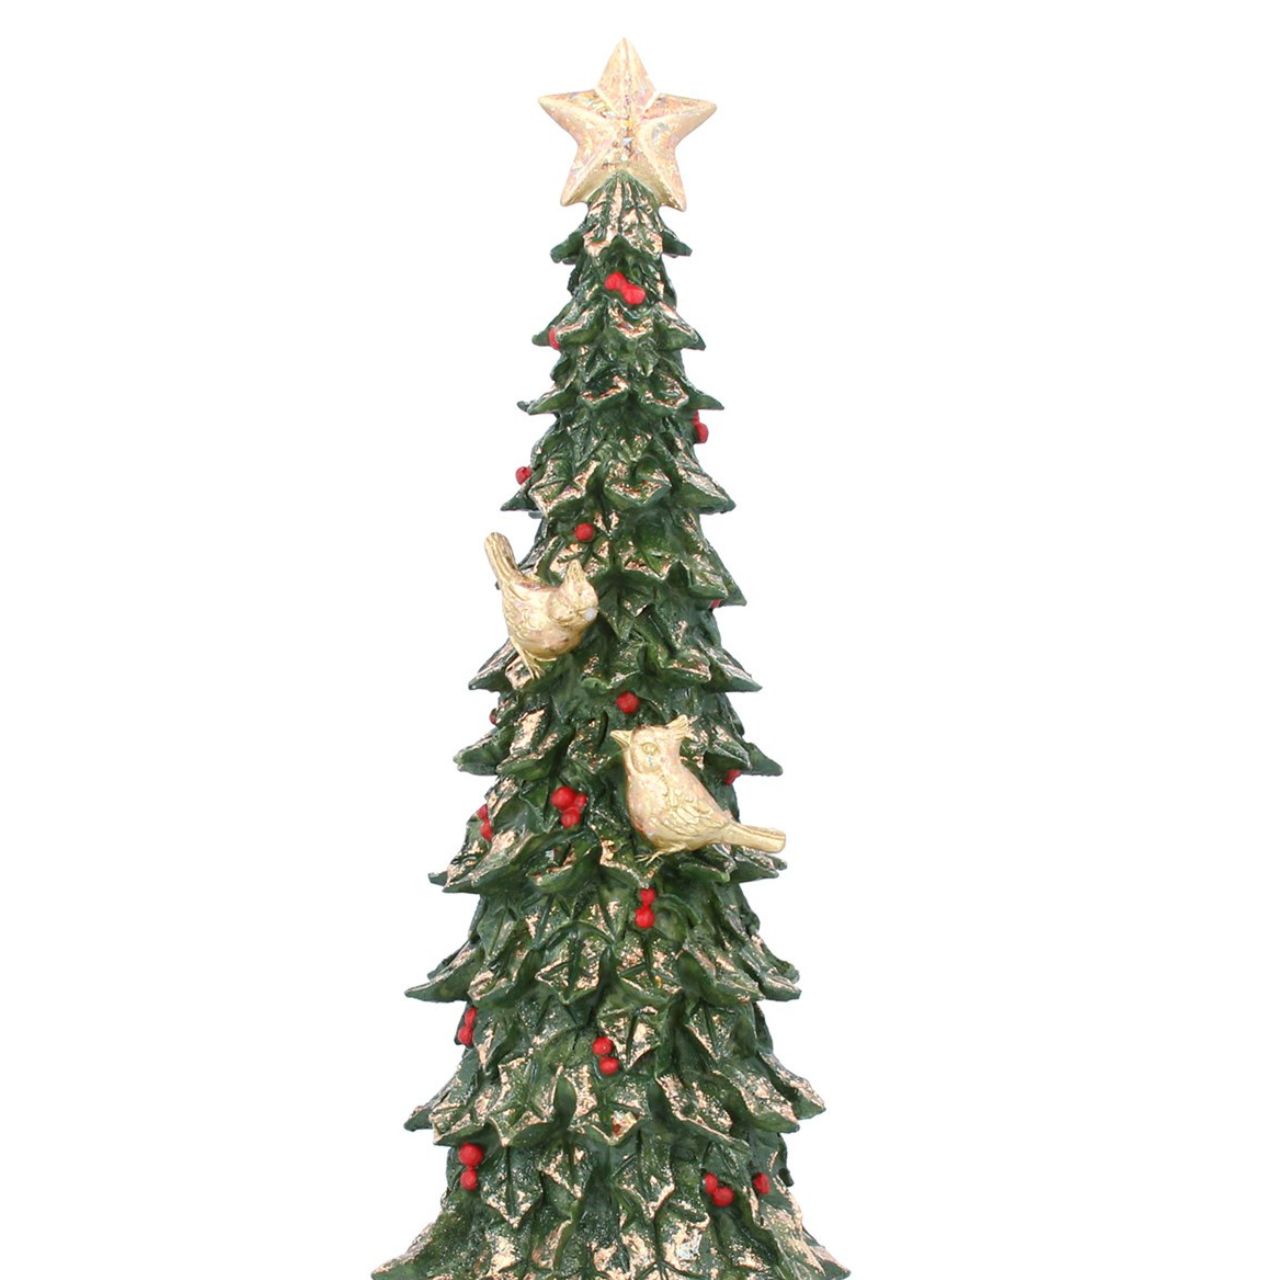 Gisela Graham Nostalgic Christmas Tree on Gold Plinth  This Nostalgic Christmas Tree from Gisela Graham is a luxurious holiday decor piece. Expertly crafted from premium materials, it stands atop a shimmering gold plinth to add a little extra sparkle to your Christmas. Perfect for traditionalists who love the nostalgia of the festive season.